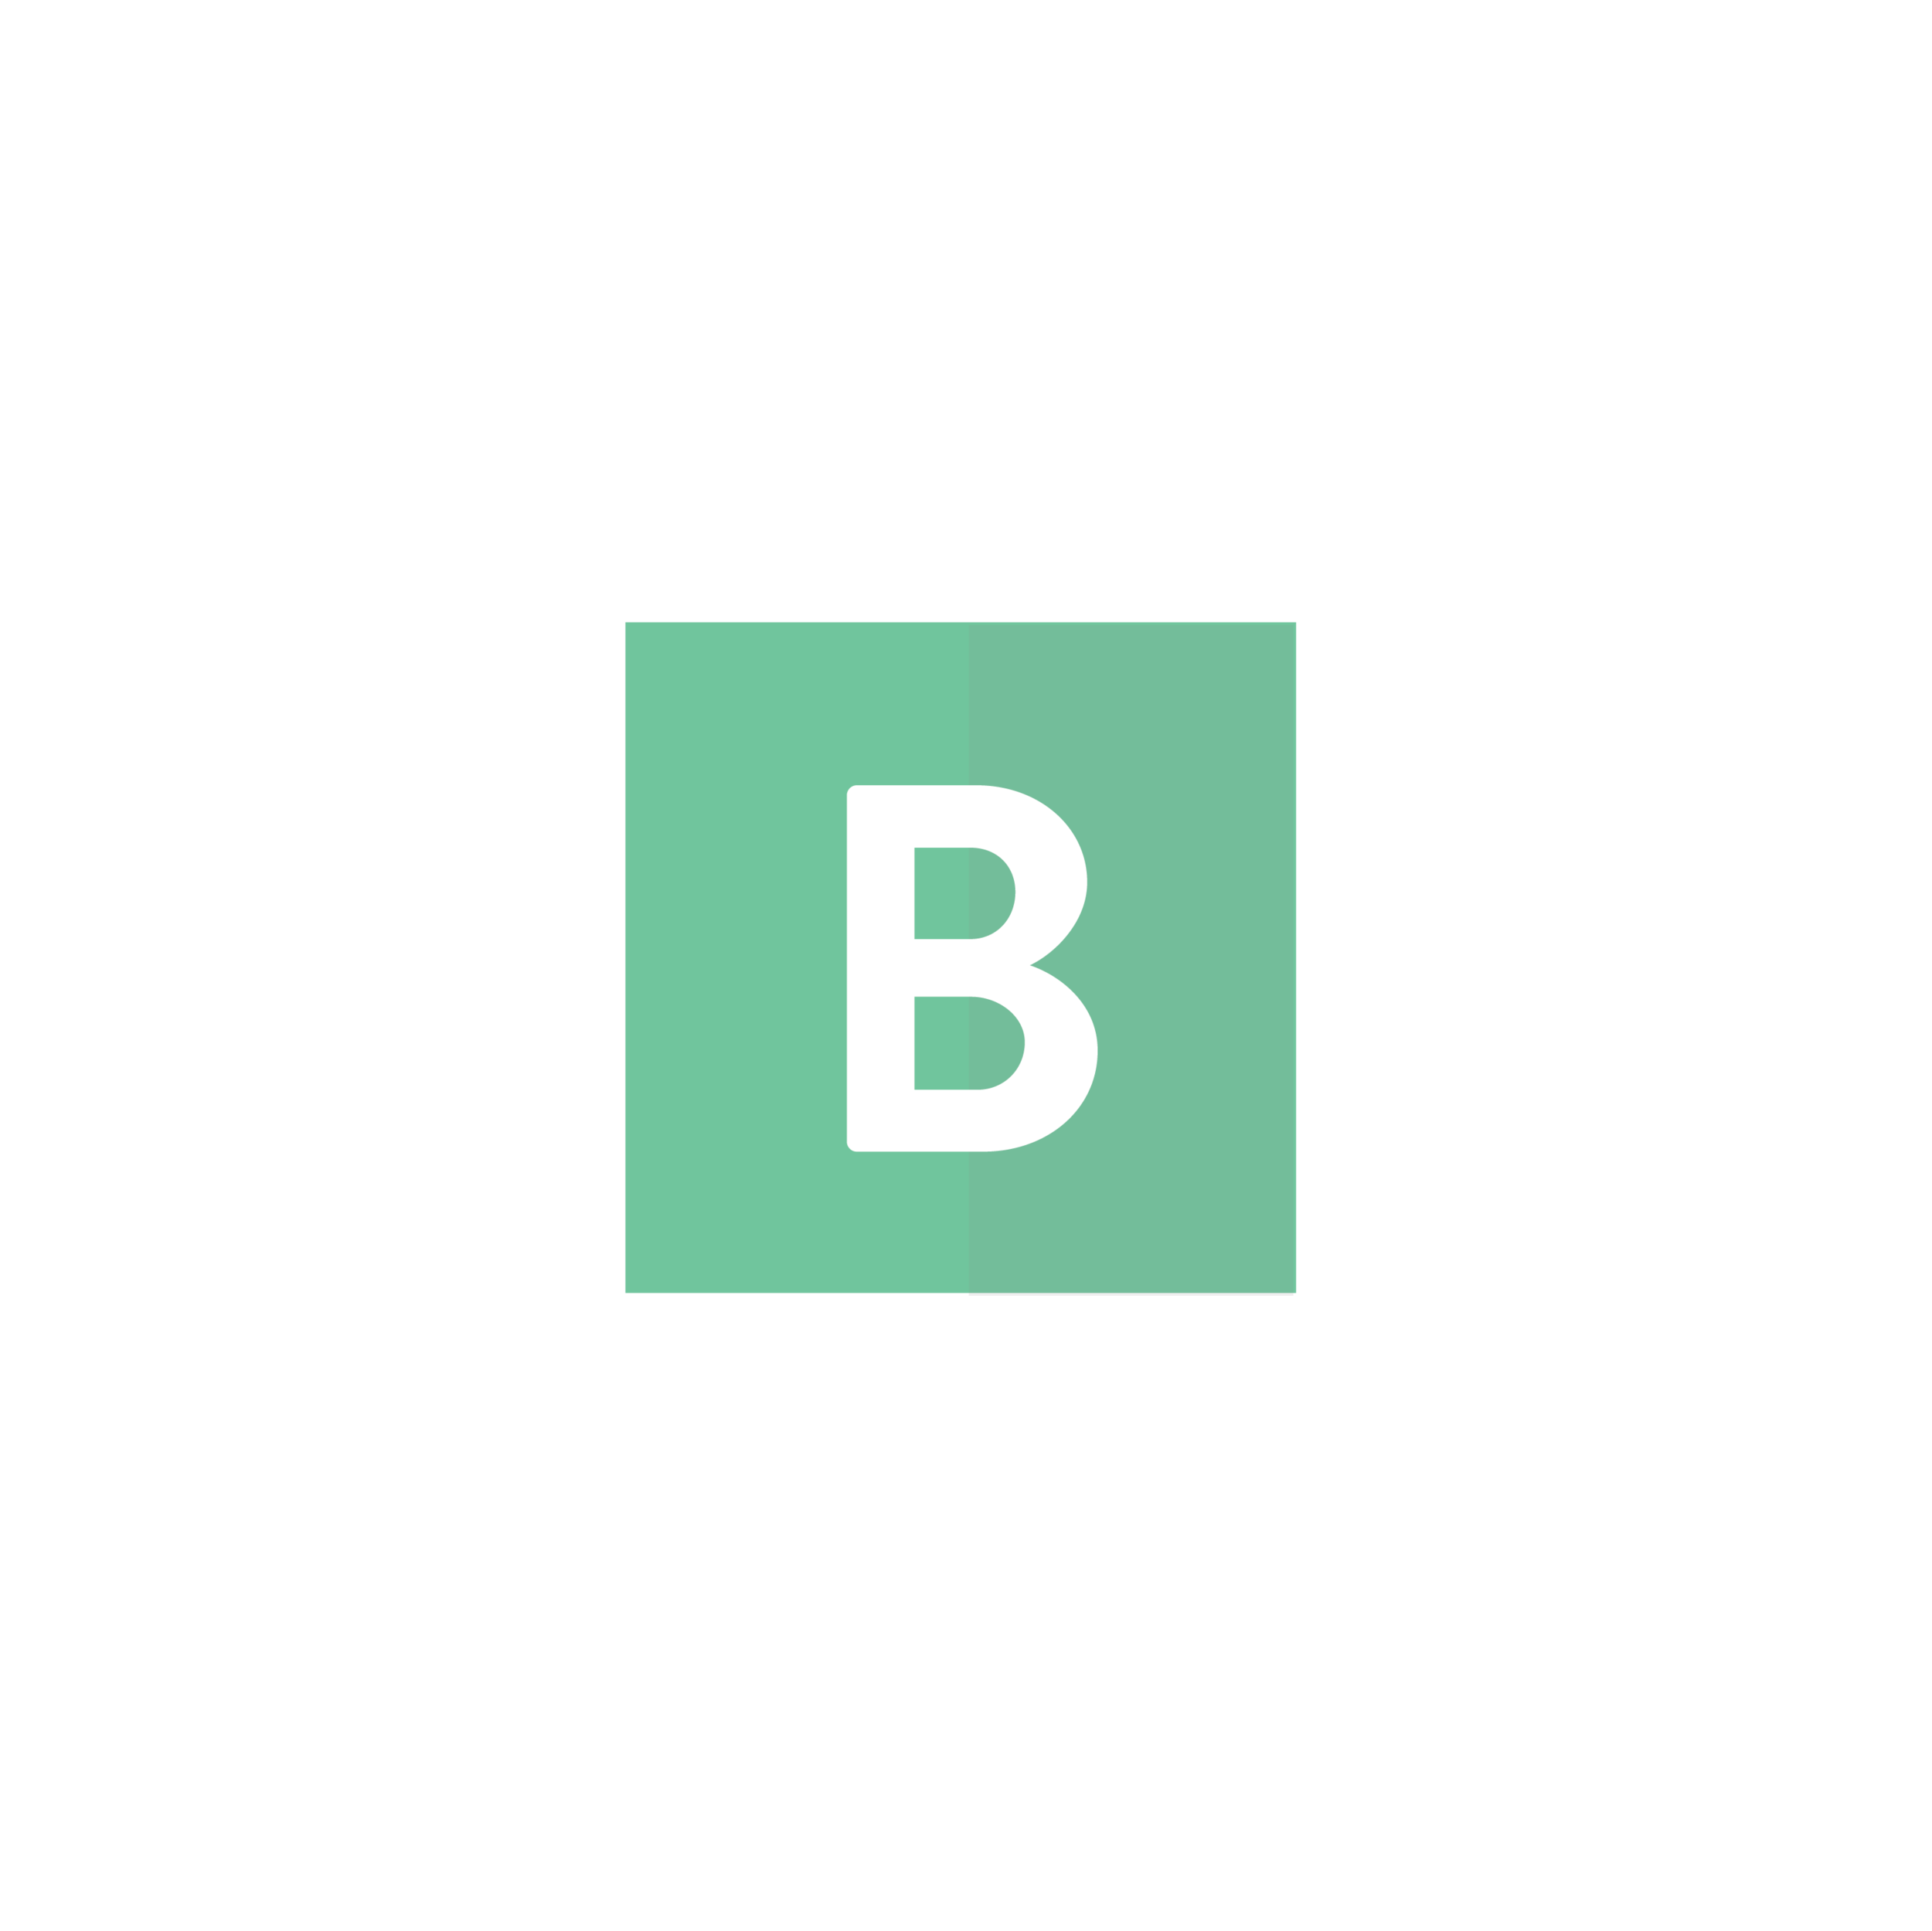 bevy app icon-06.png